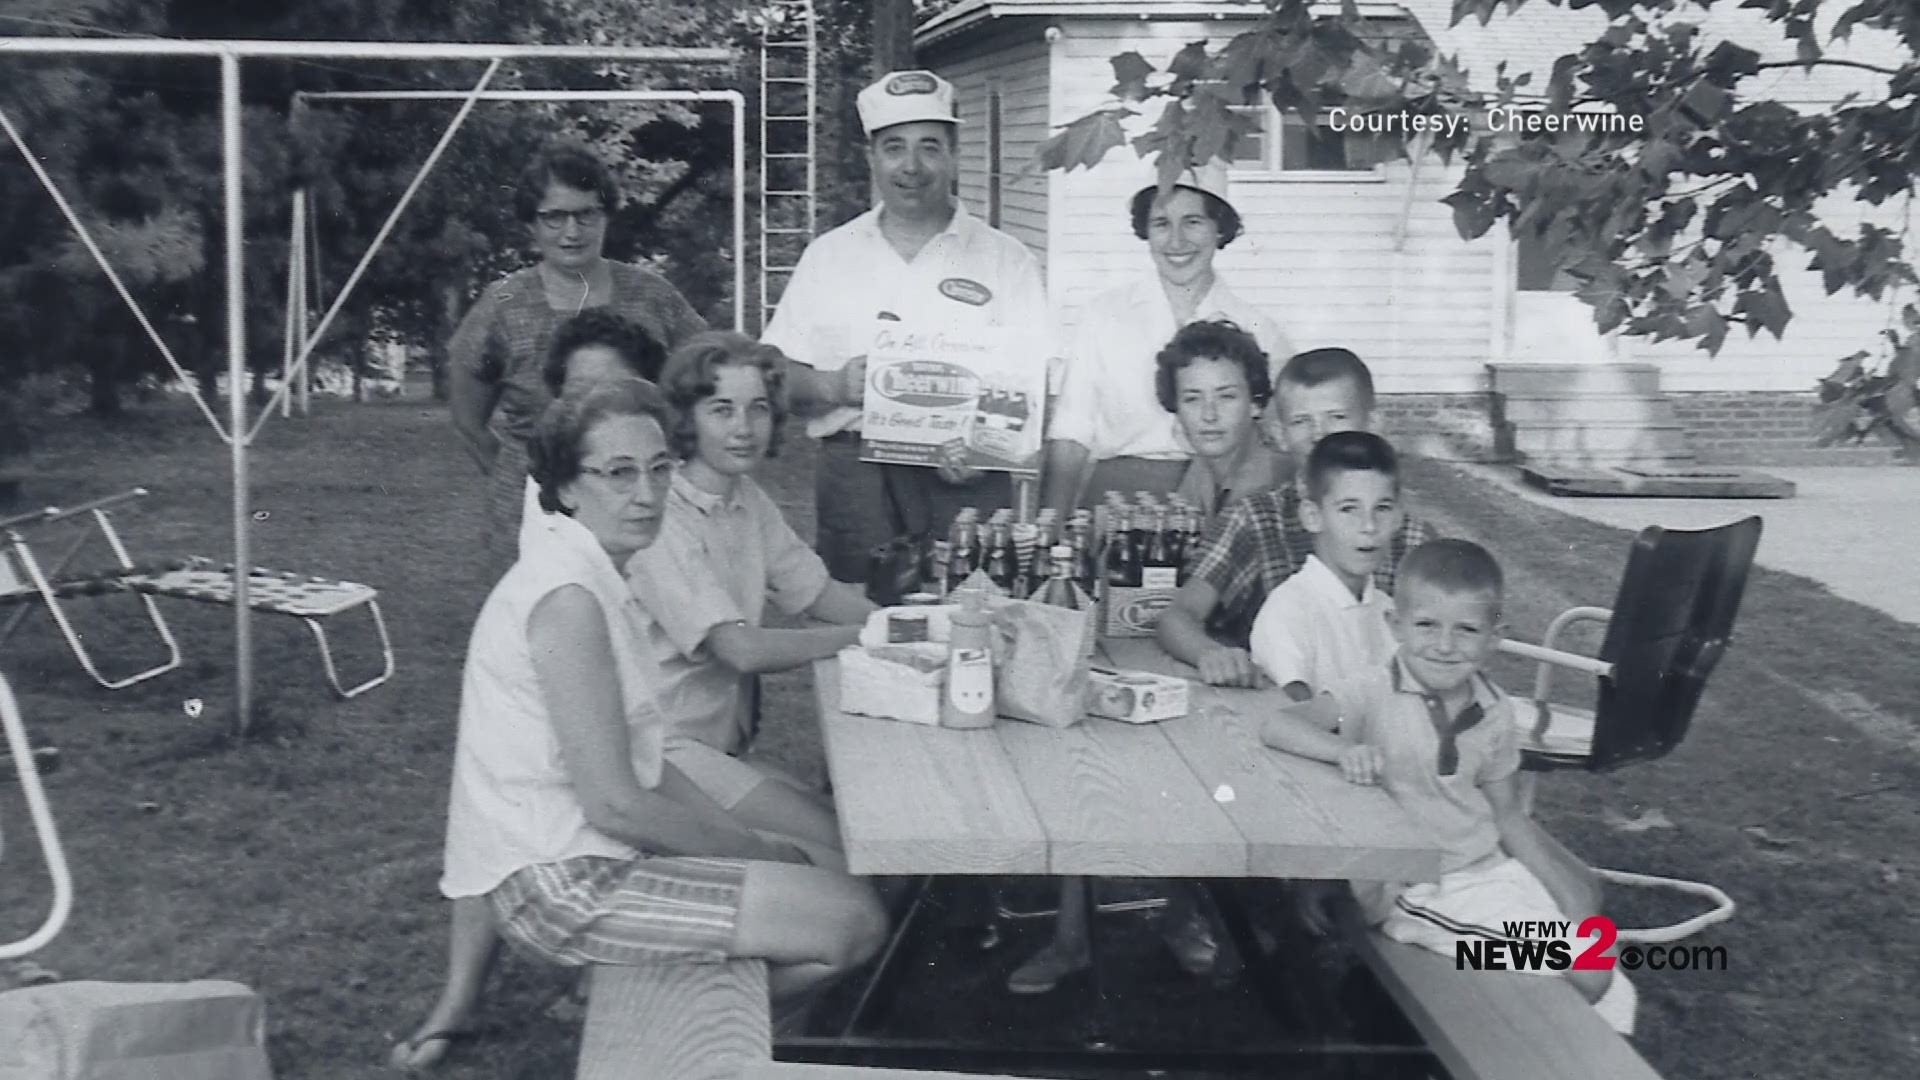 A look back at Cheerwine over the years